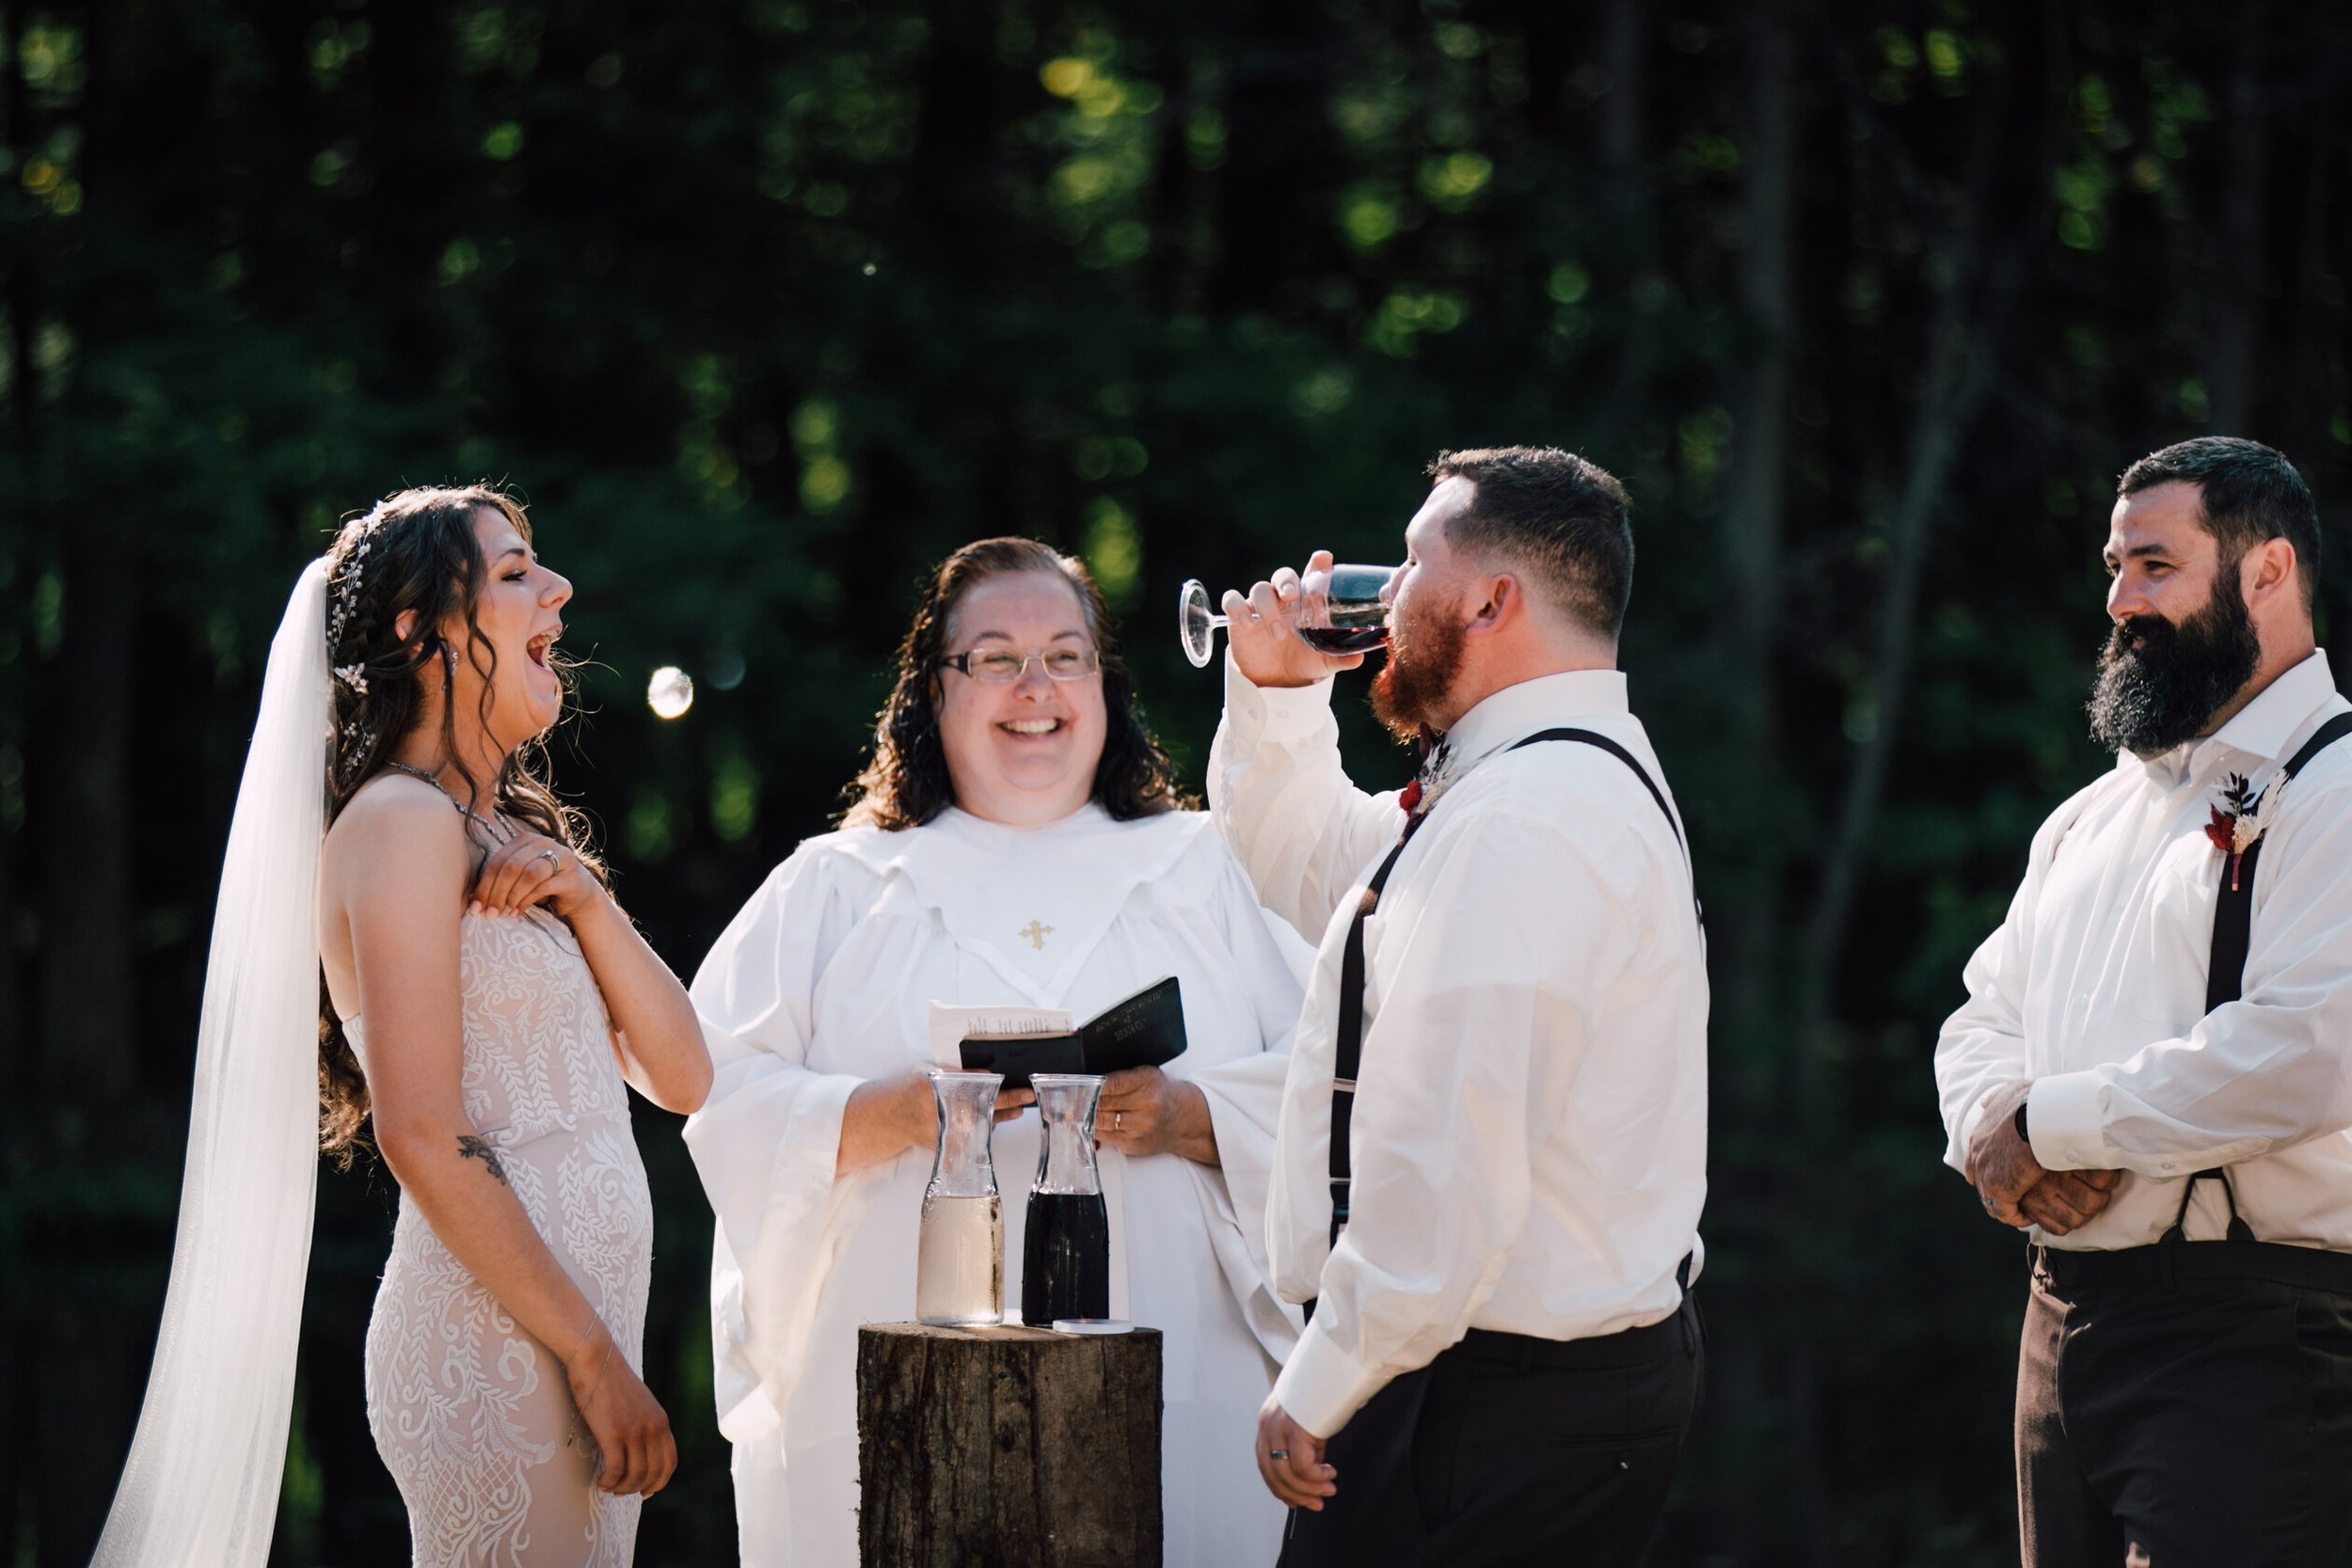  The bride laughs as the groom chugs the wine from their wine unity ceremony 